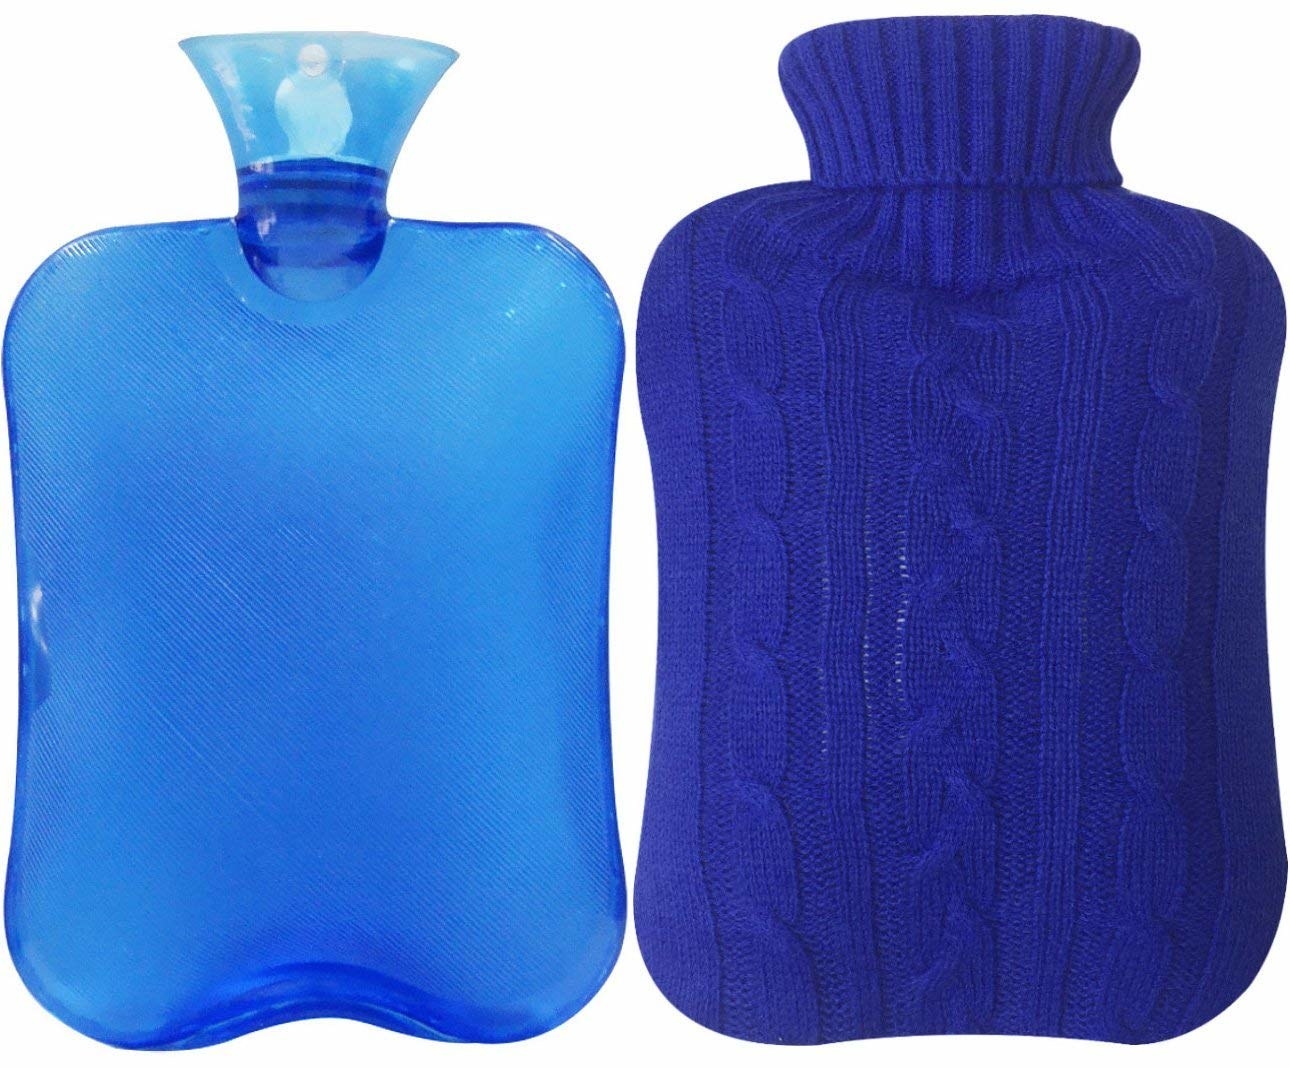 Blue hot water bottle and blue knit cover